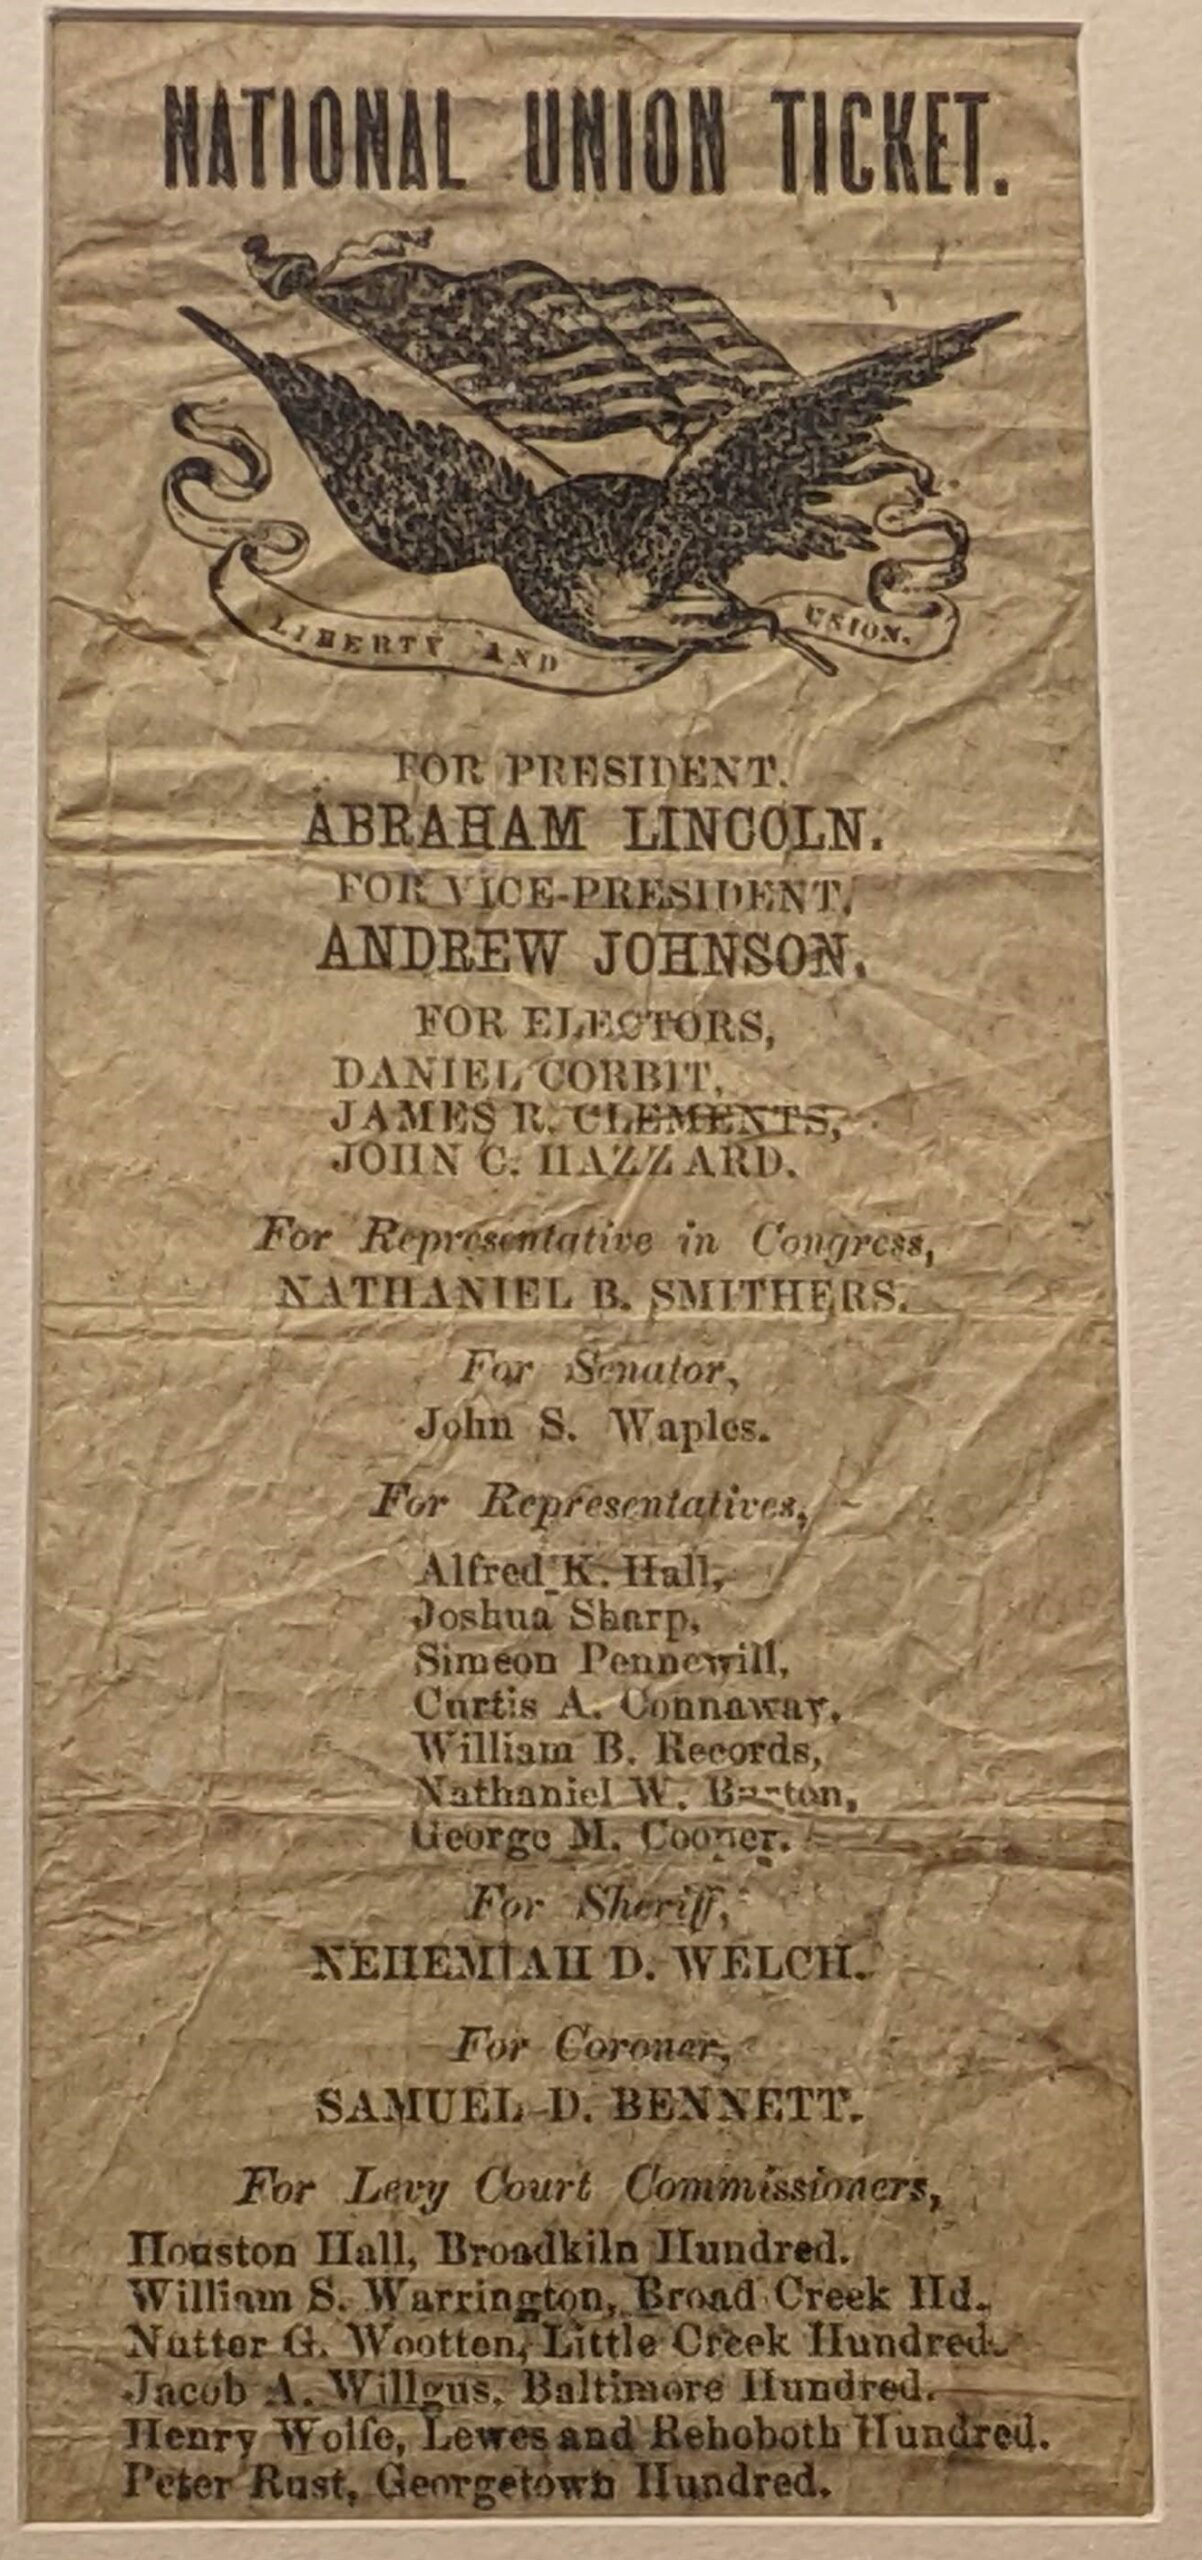 1864 Delaware general election sample ballot for the National Union Ticket, 1864